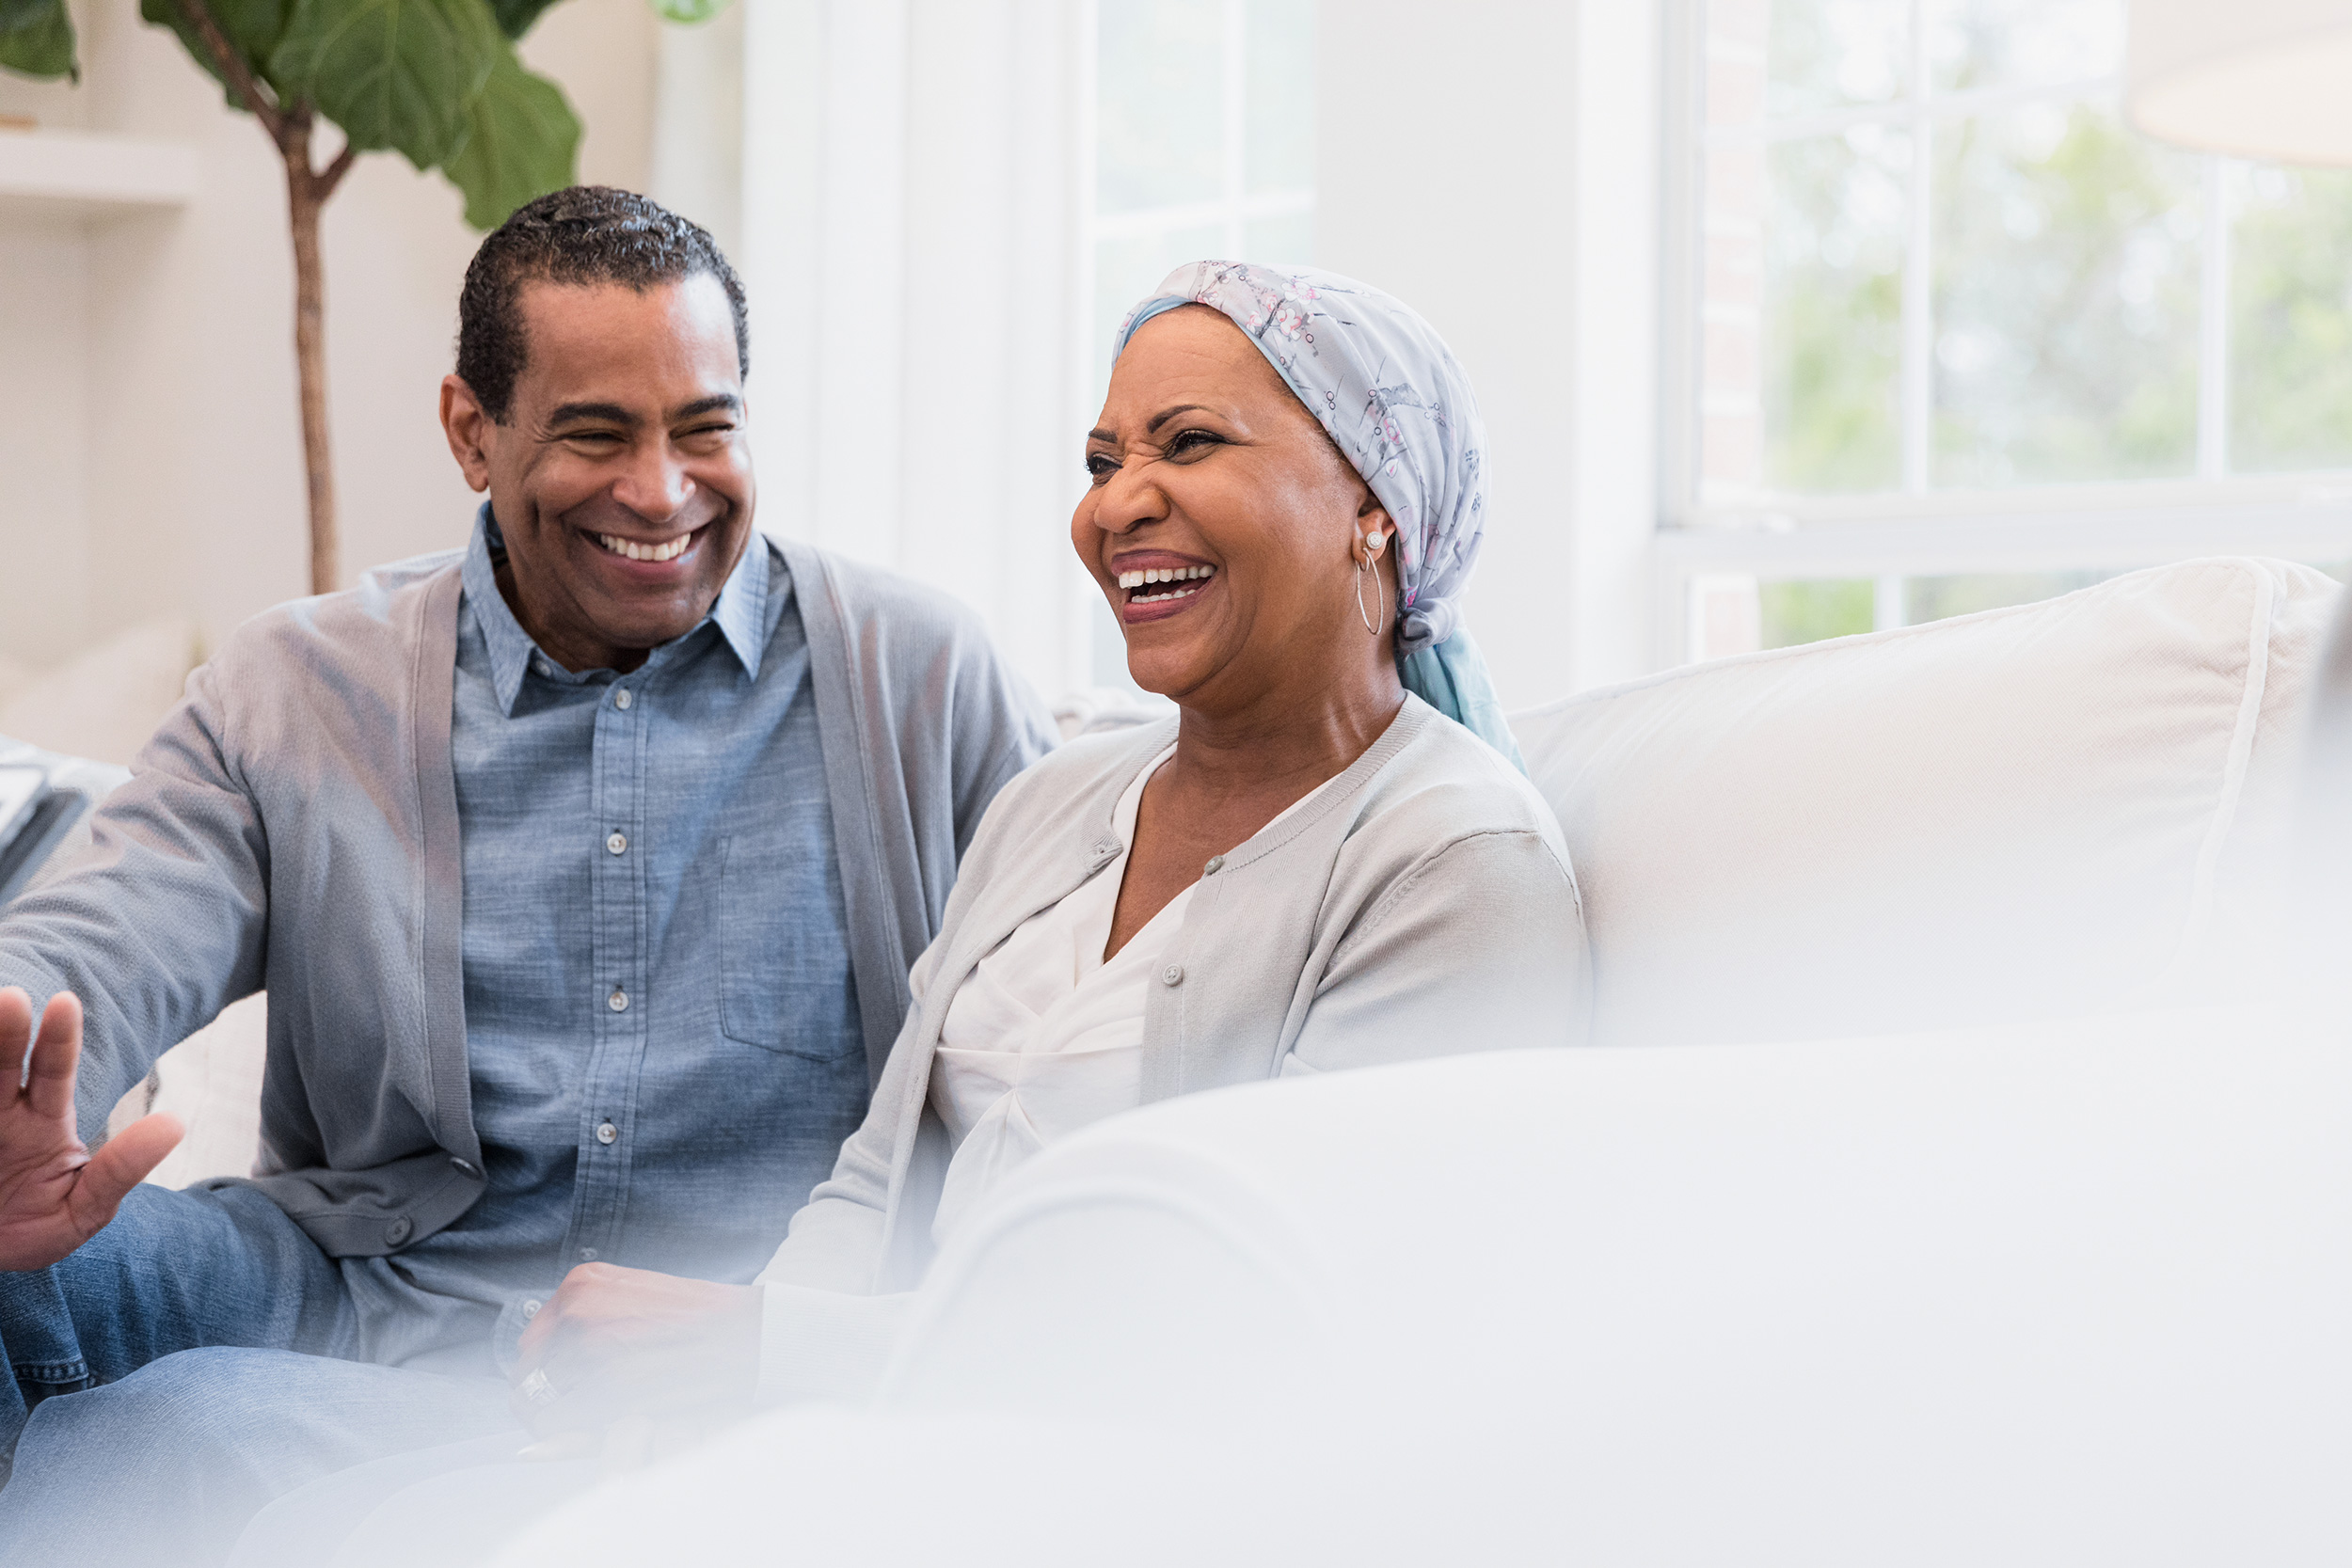 A man and woman it on a couch smiling in conversation. Troutman & Troutman disability lawyers answer questions about disability benefits every day.